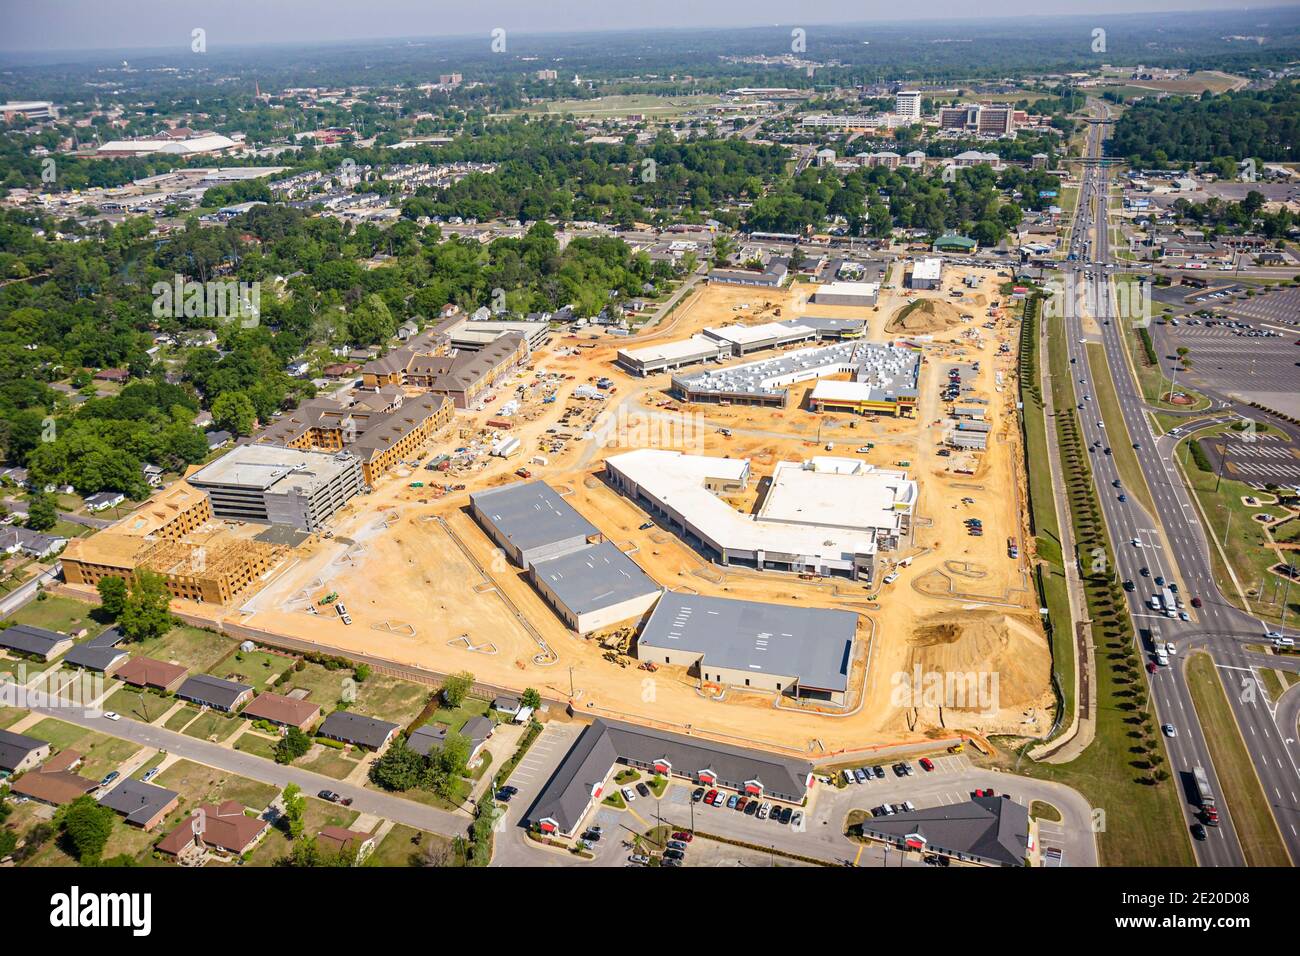 Tuscaloosa Alabama,aerial overhead view,under construction site new shopping center centre mall,residential condominium buildings, Stock Photo